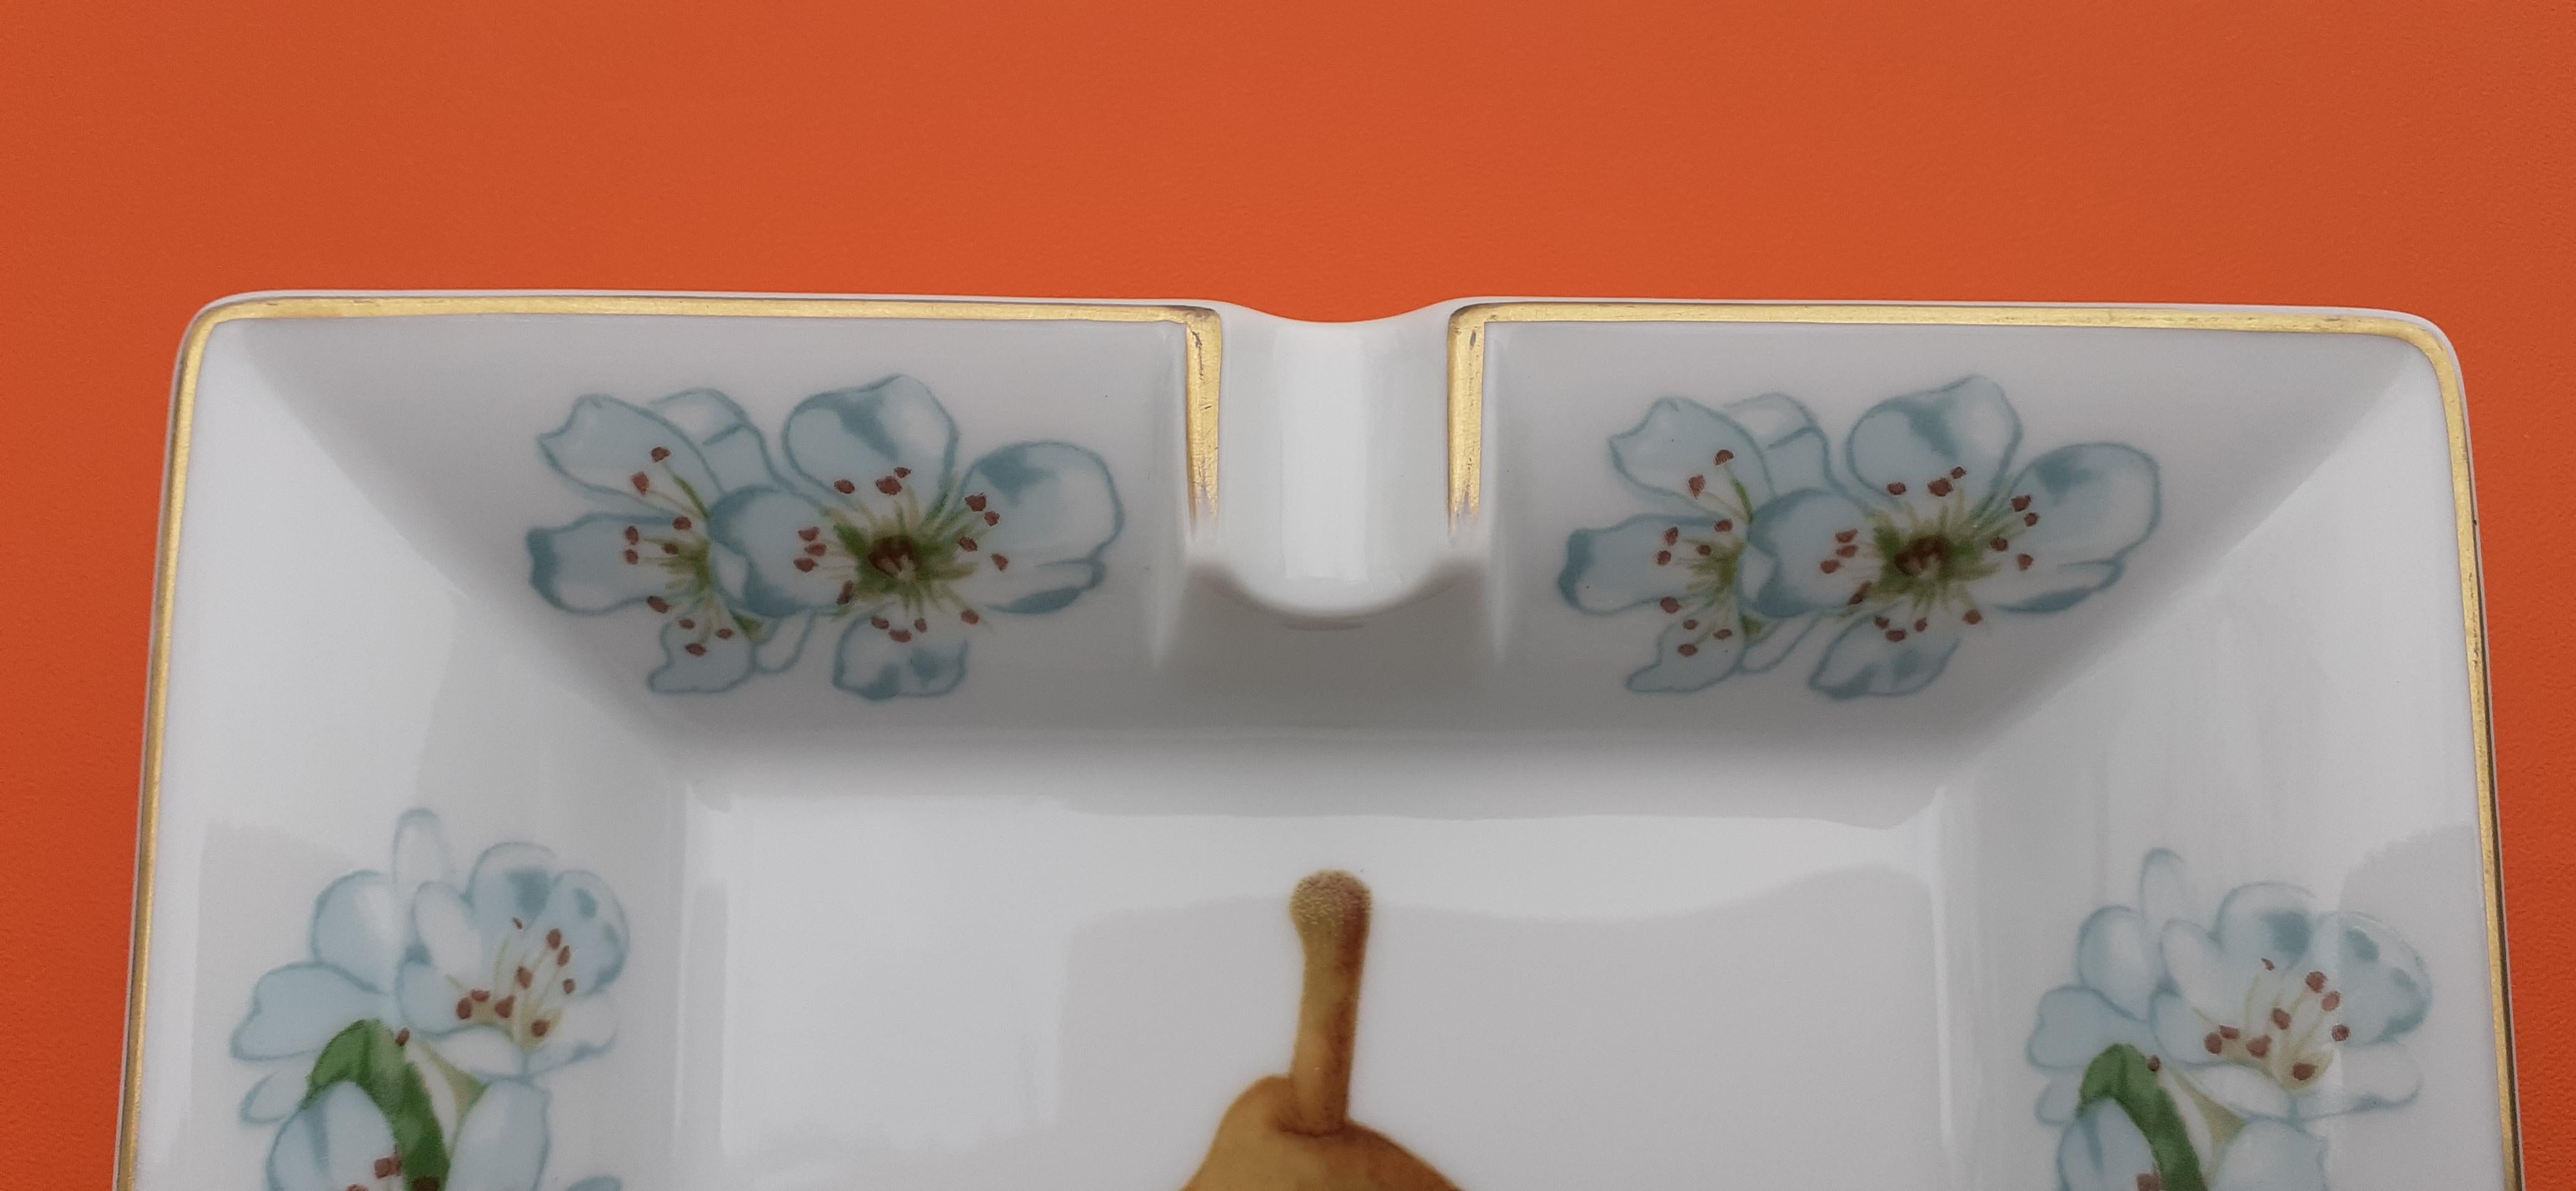 Rare Hermès Cigar Ashtray Change Tray in Porcelain Pear and Pear Blossoms For Sale 2